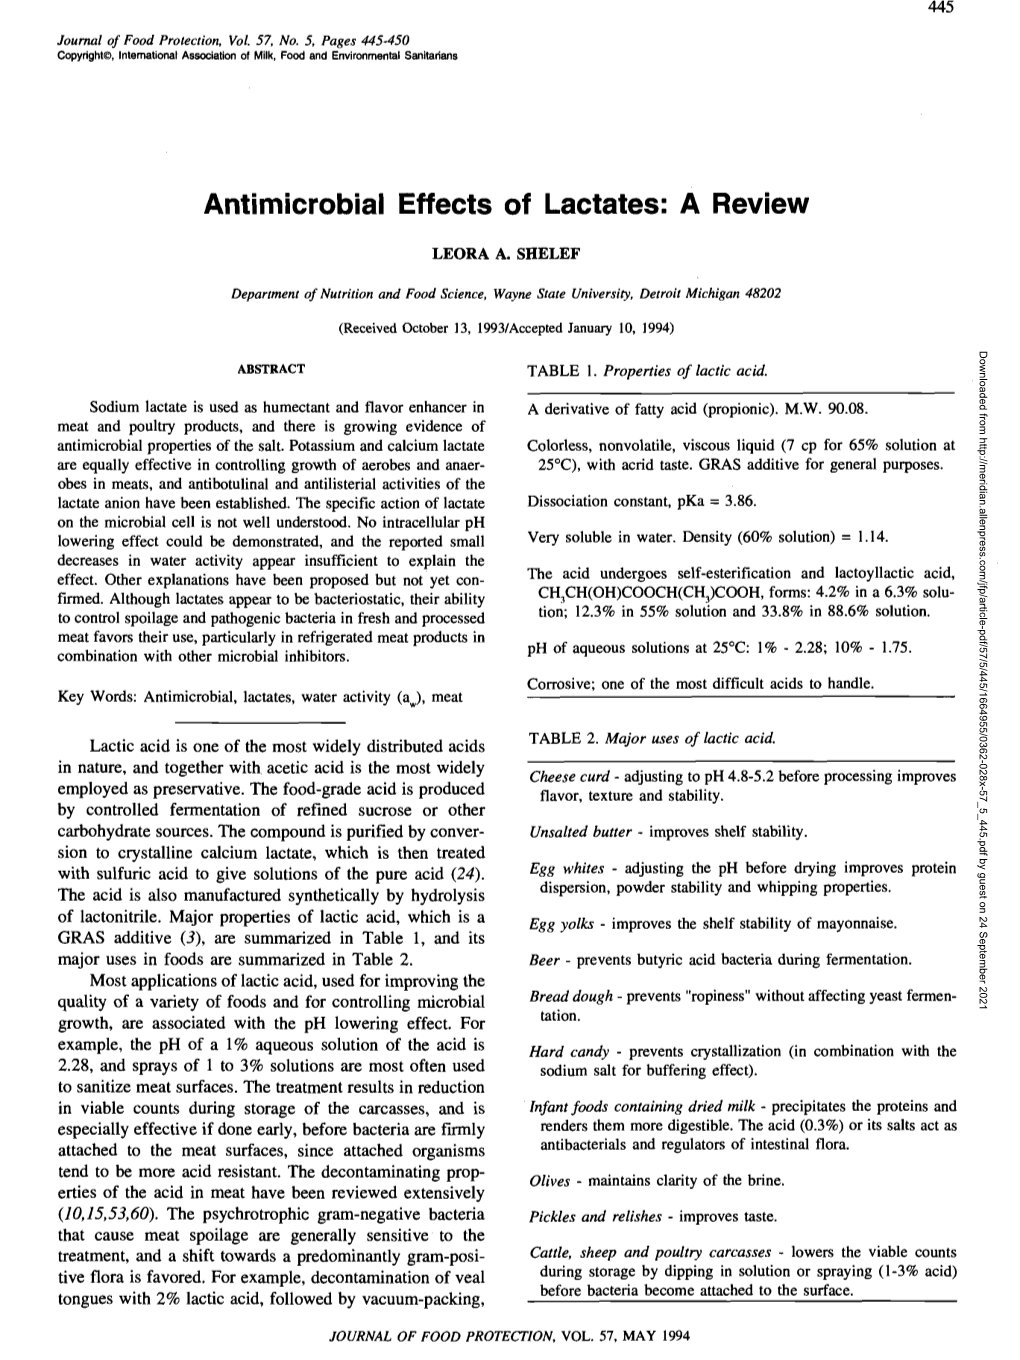 Antimicrobial Effects of Lactates: a Review